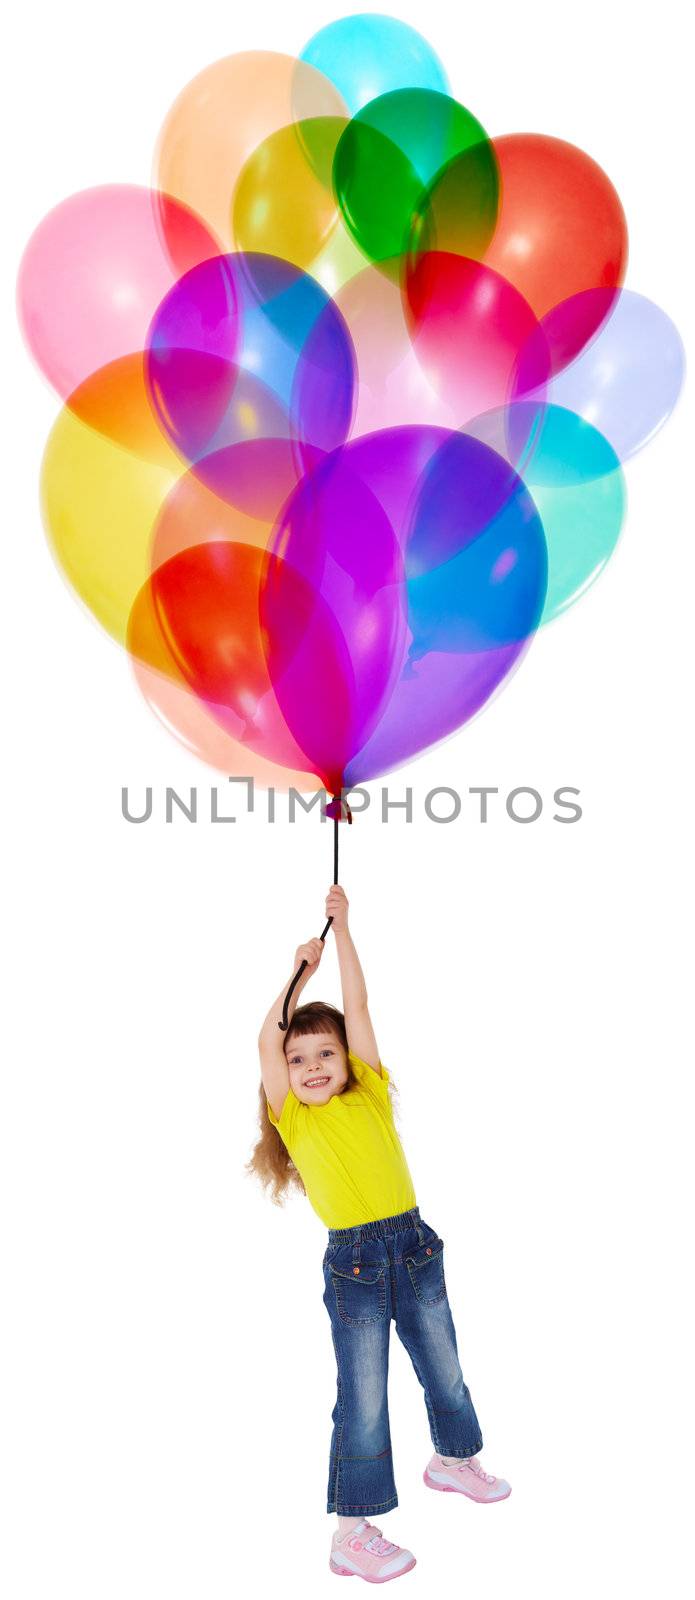 The little girl is flying on a bunch of color balloons